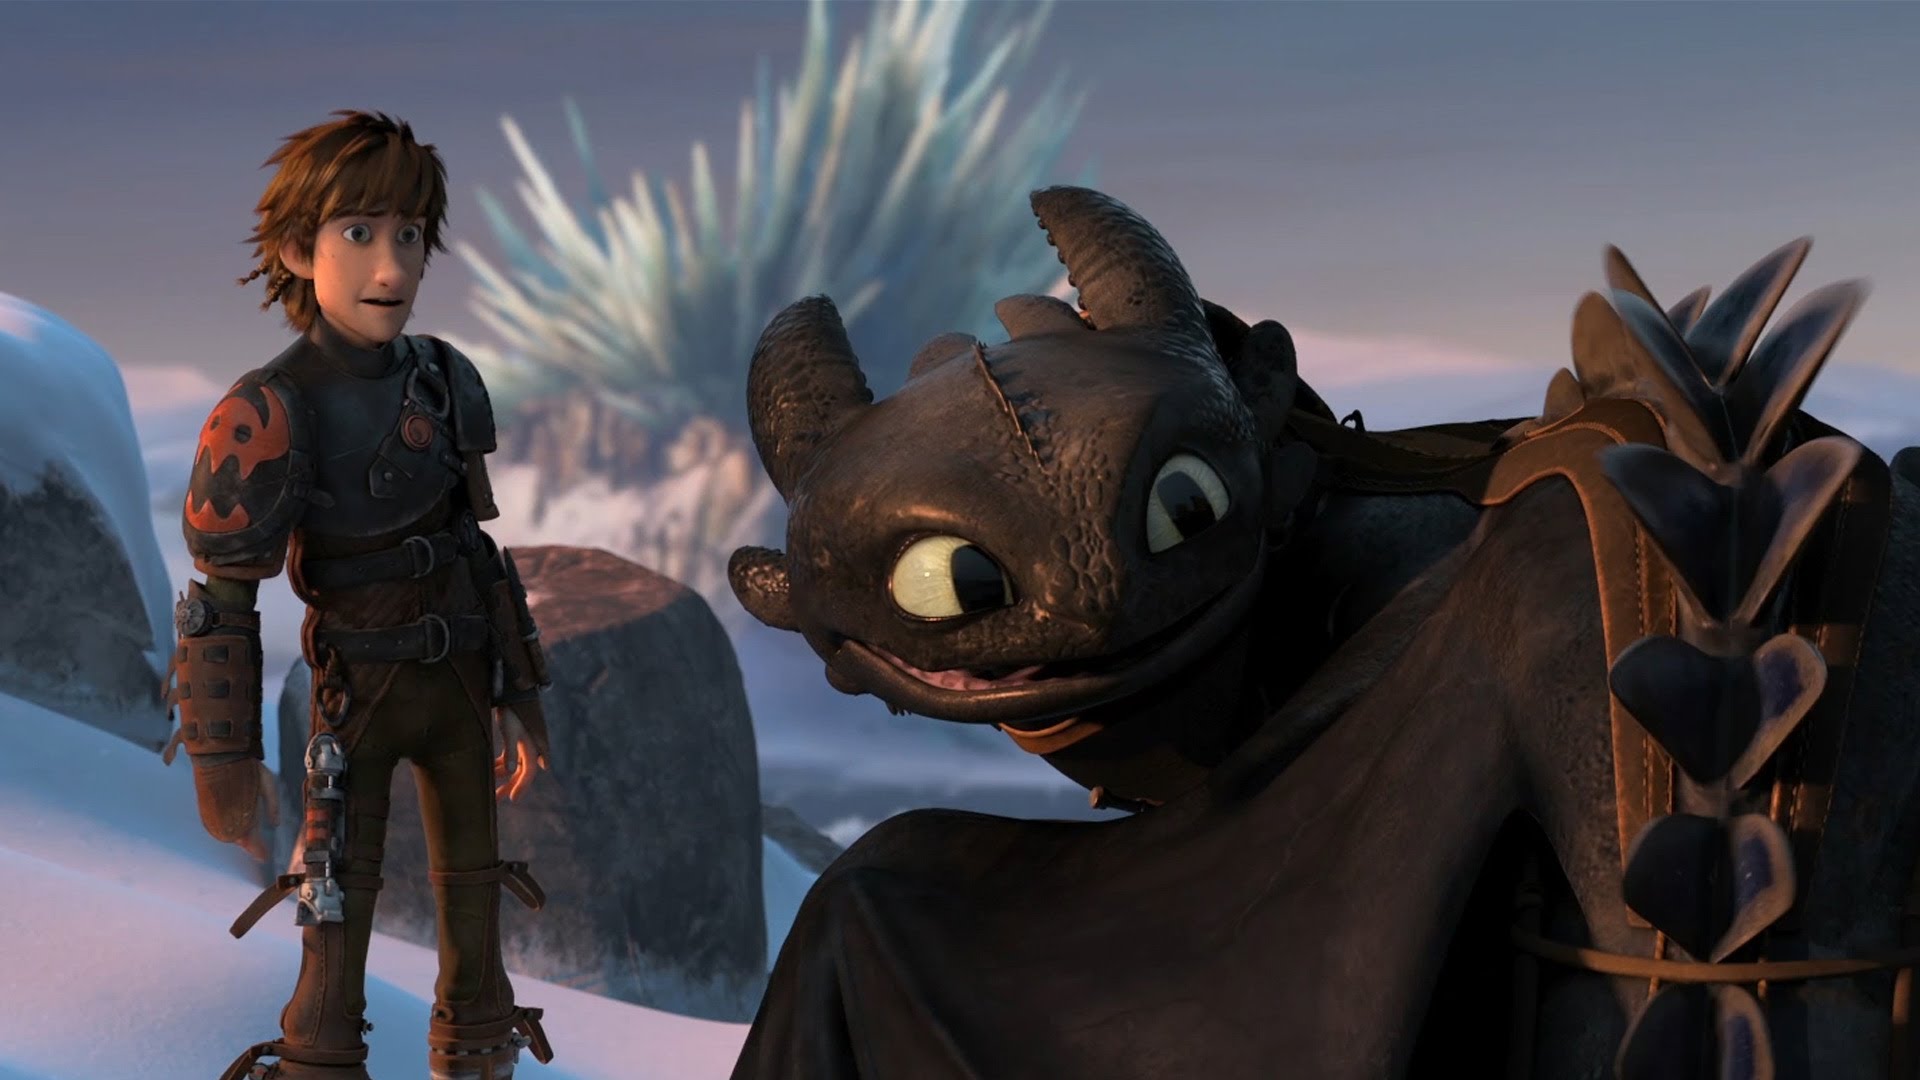 How To Train Your Dragon 2 still